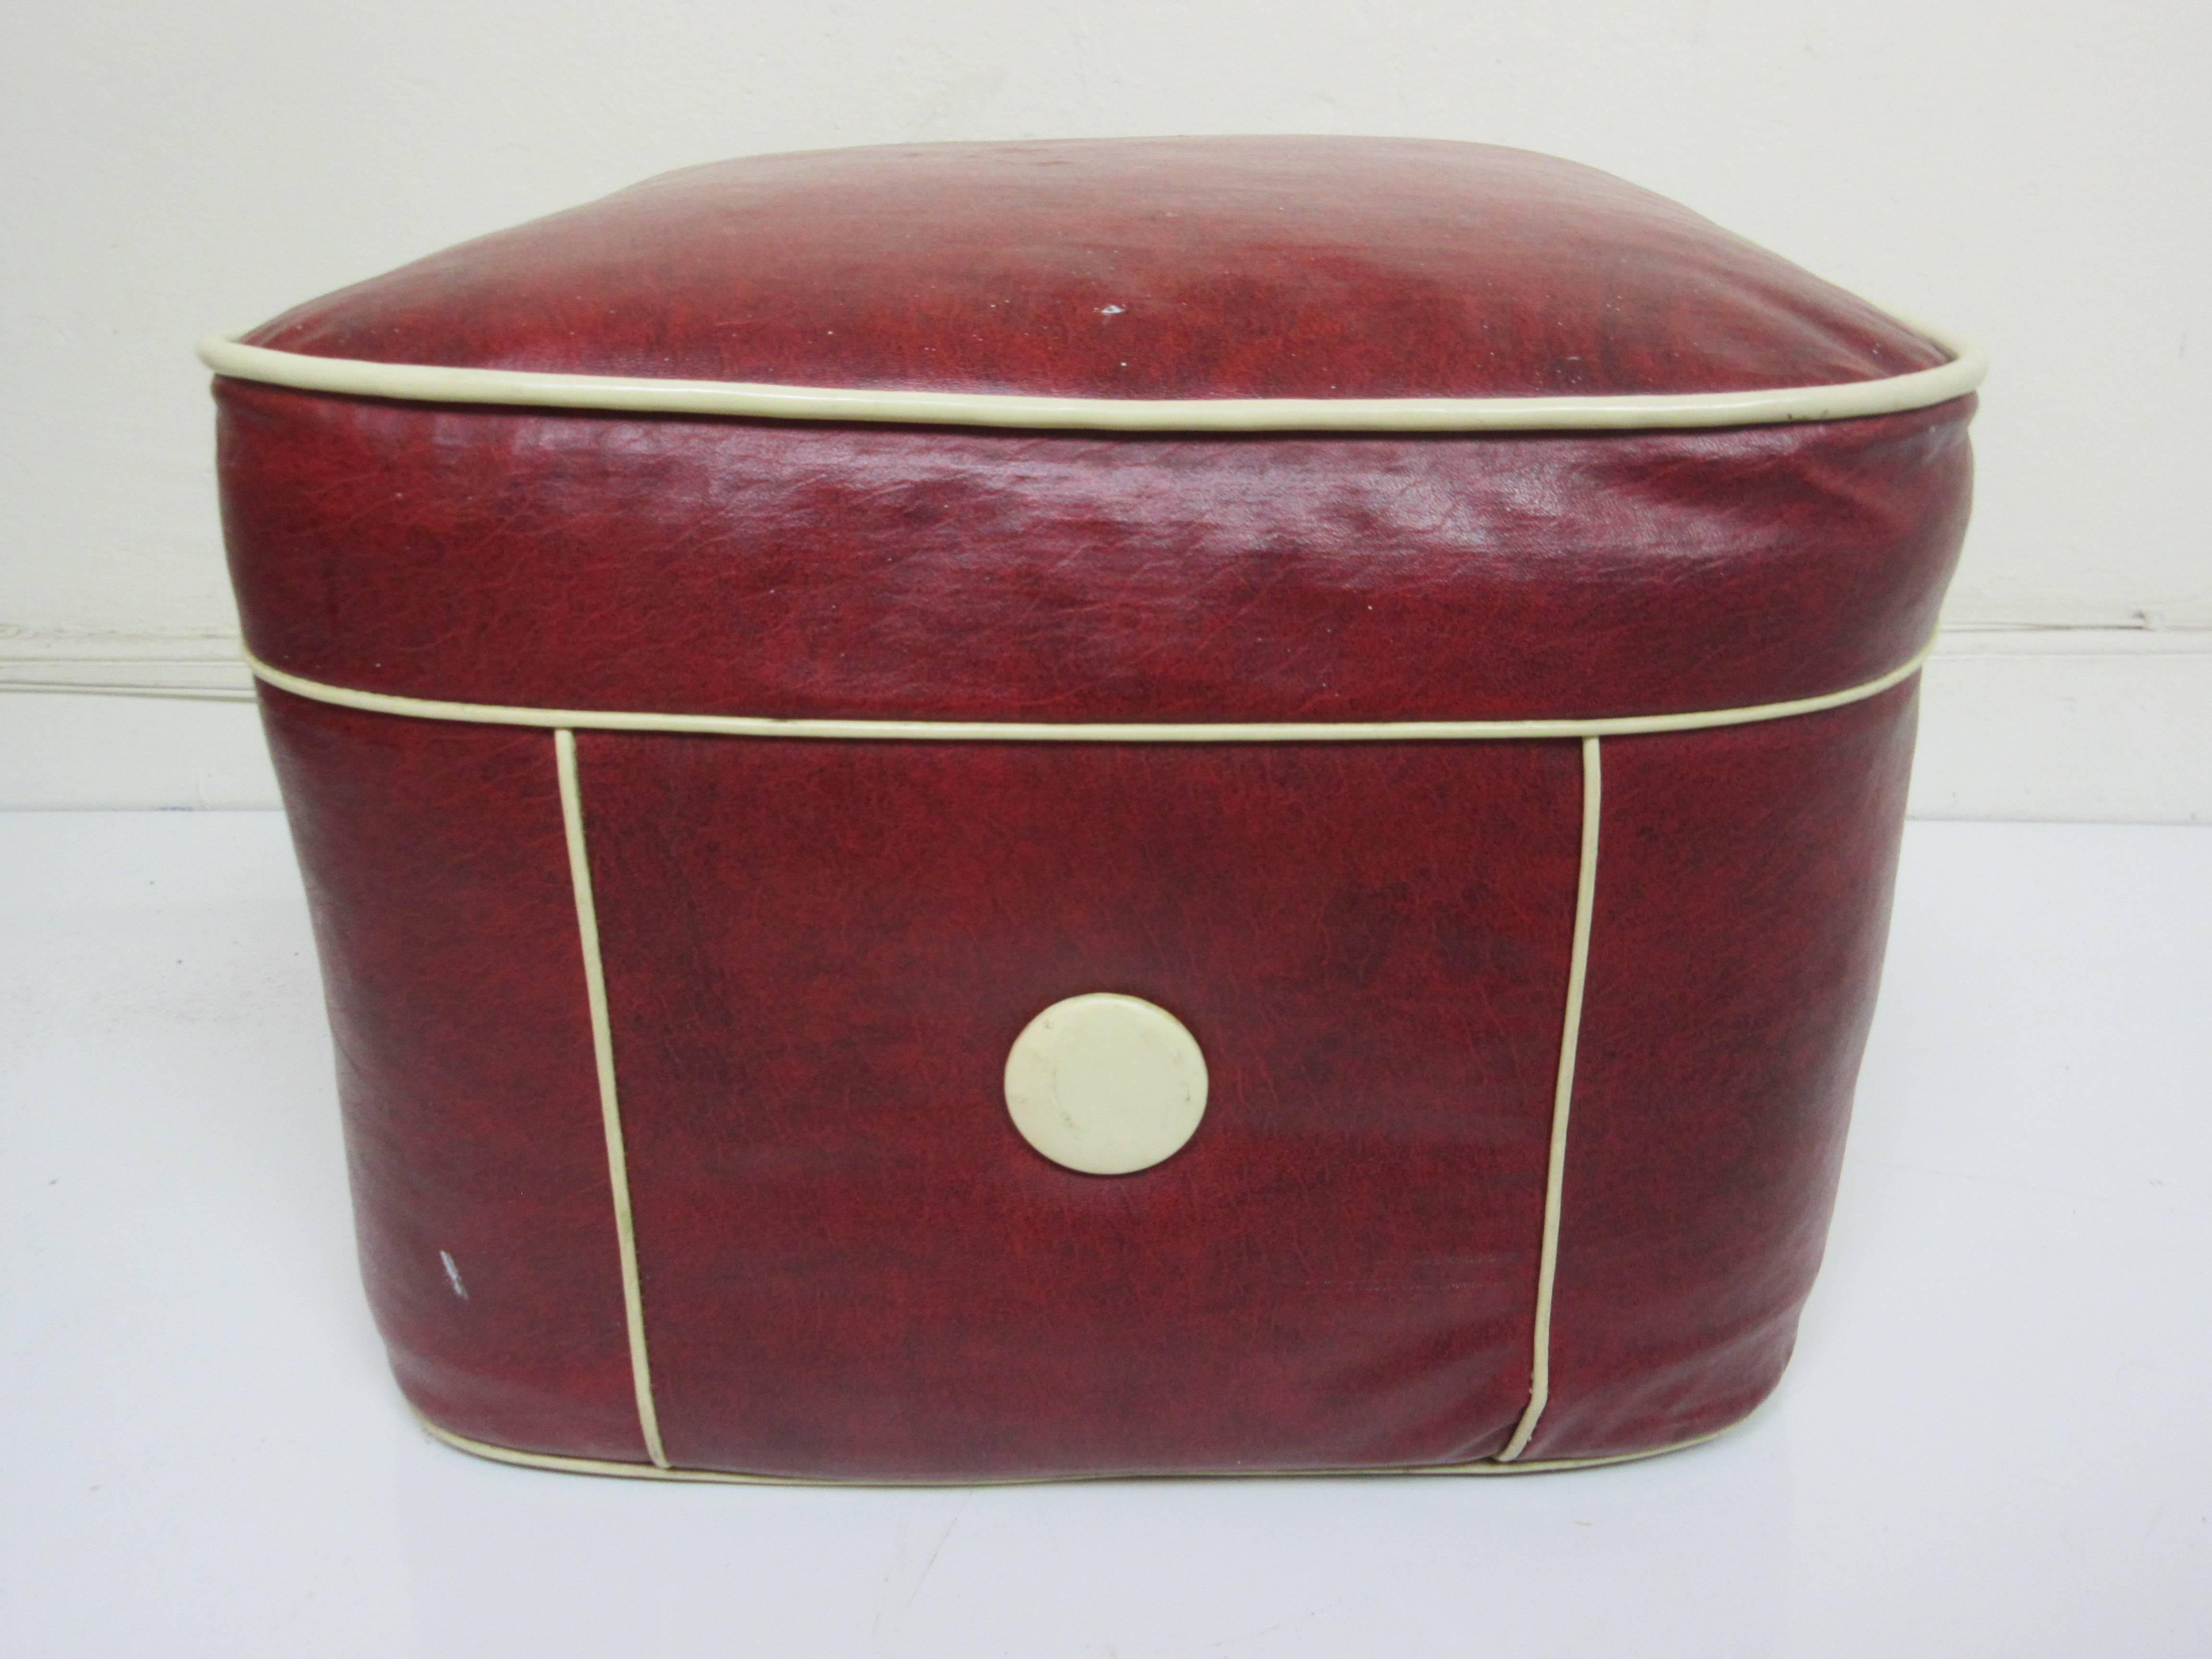 1950s hassock/ottoman in Maraschino red cherry vinyl with white piping. All original with few flaws. Red is vibrant and no stains or fading. Two small missing pieces (pictured).